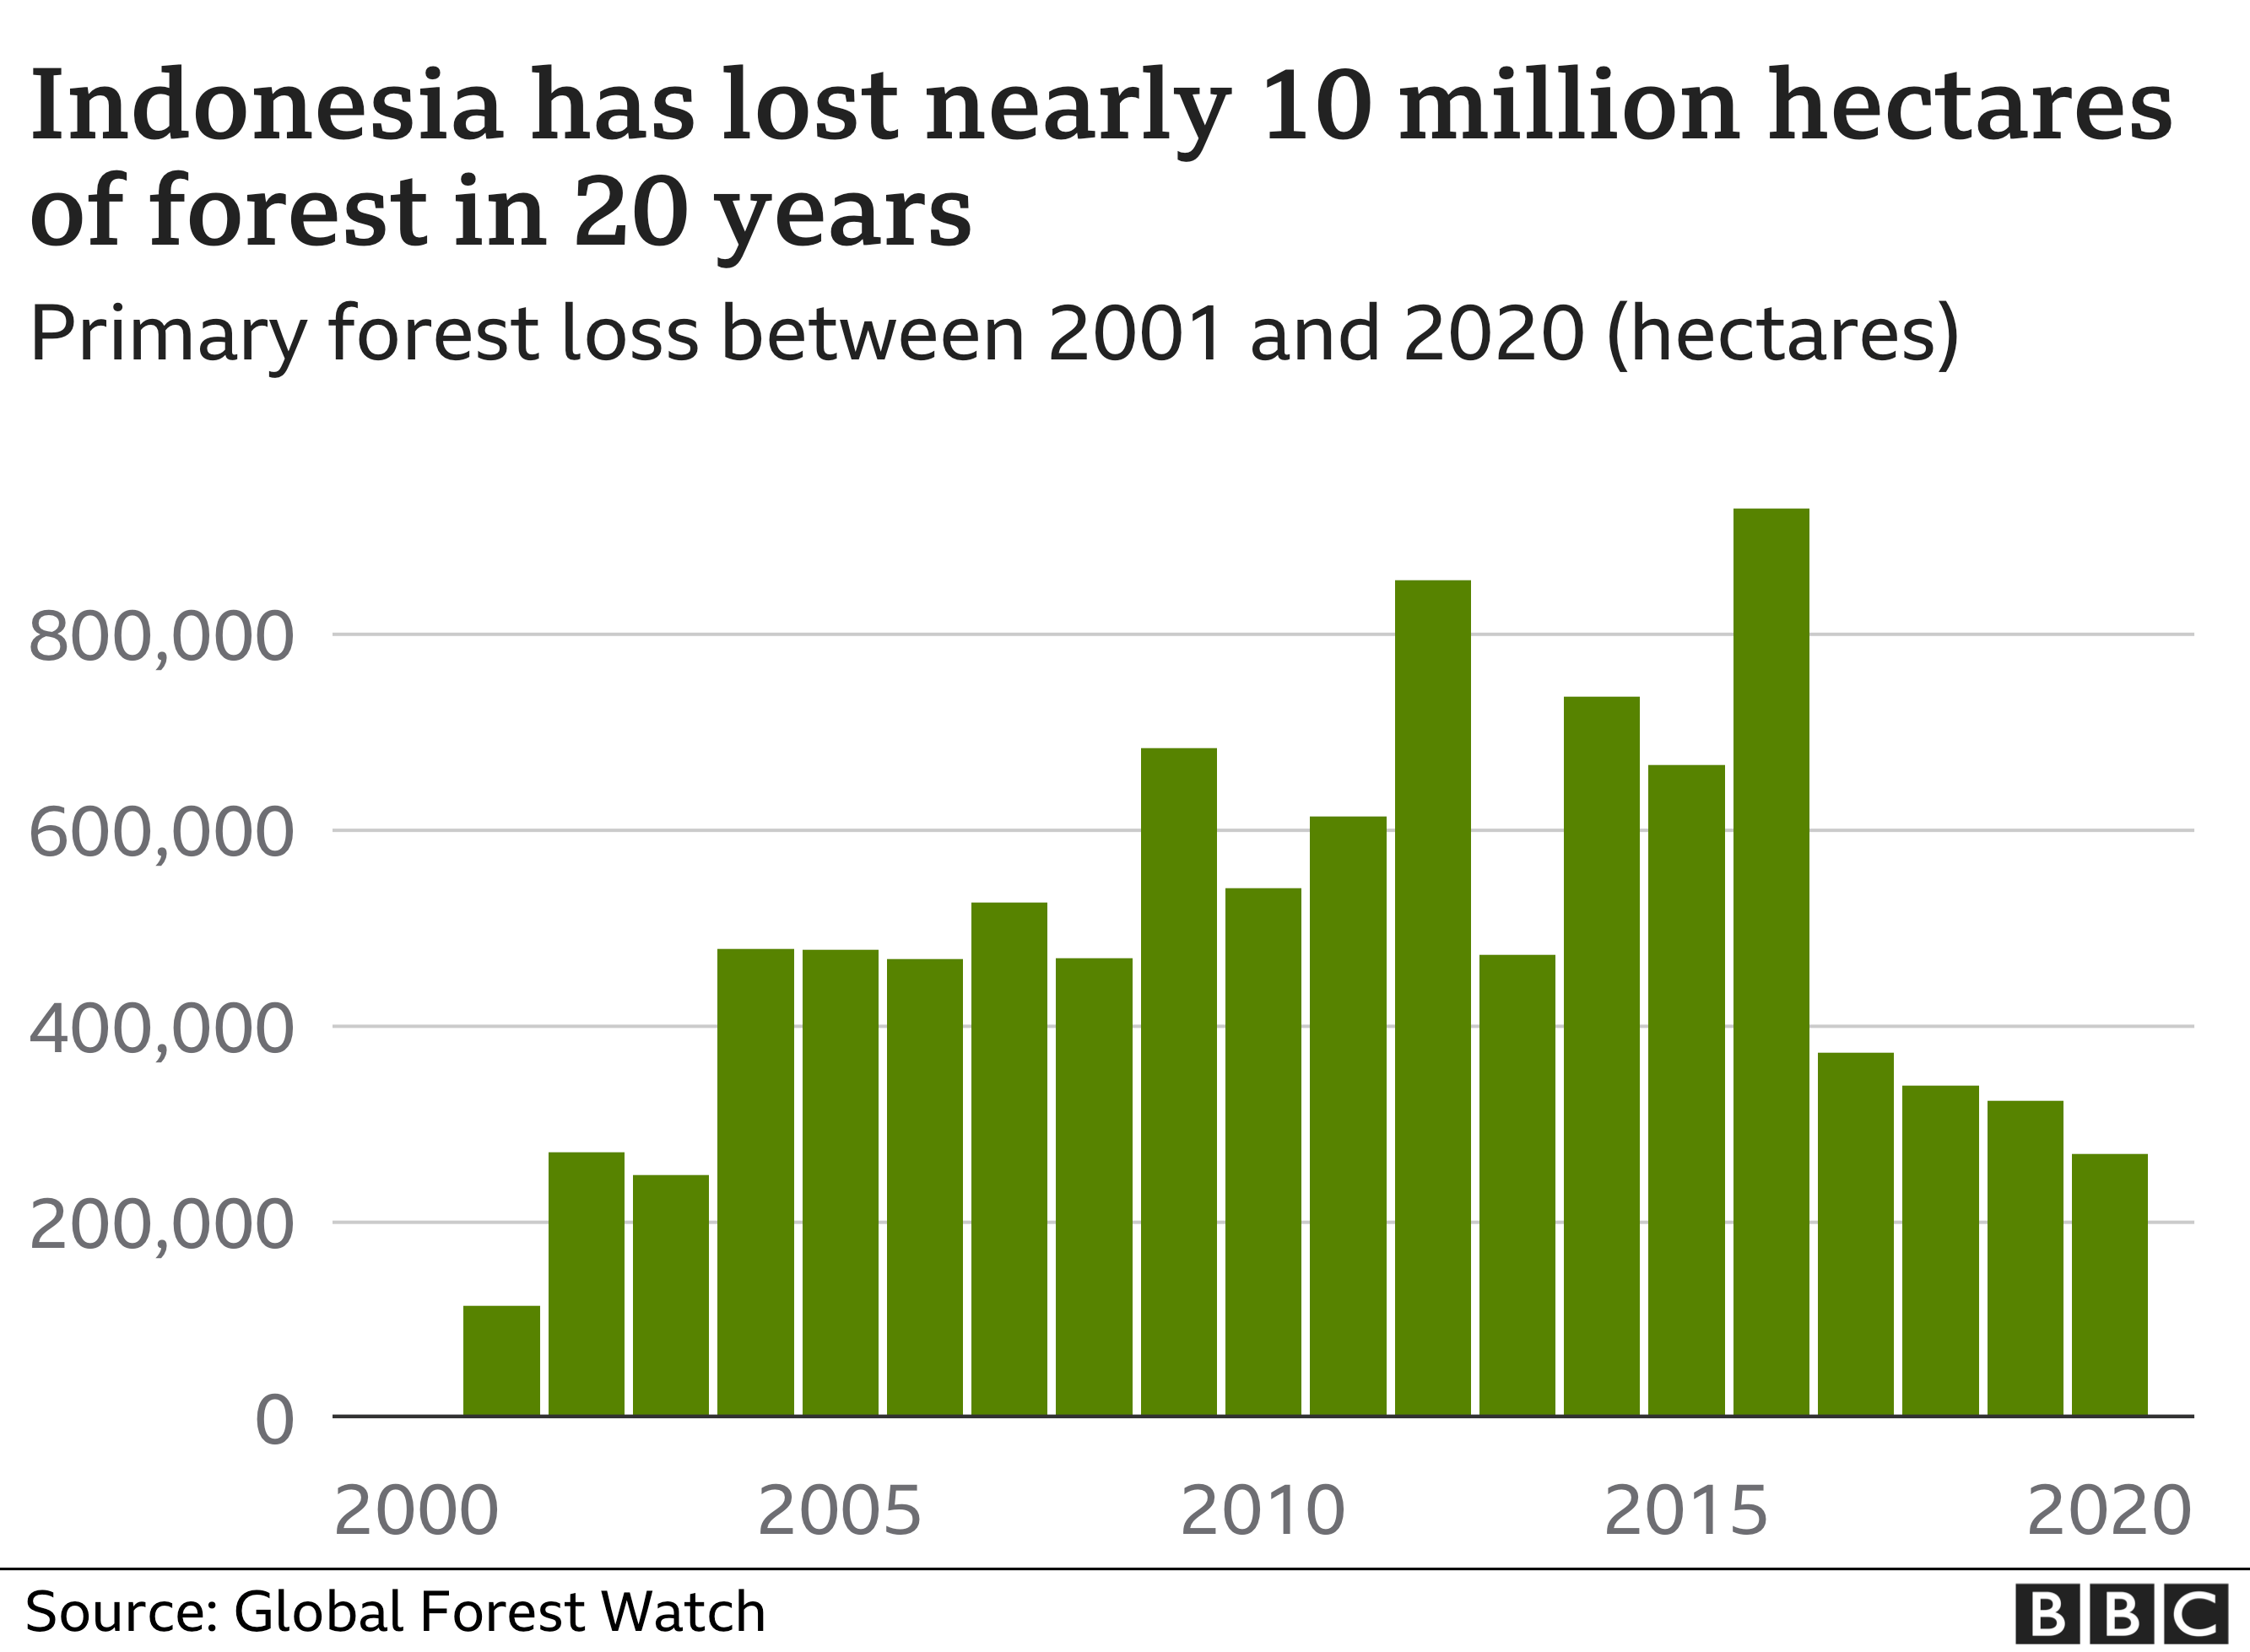 Bar chart showing annual forest loss in Indonesia